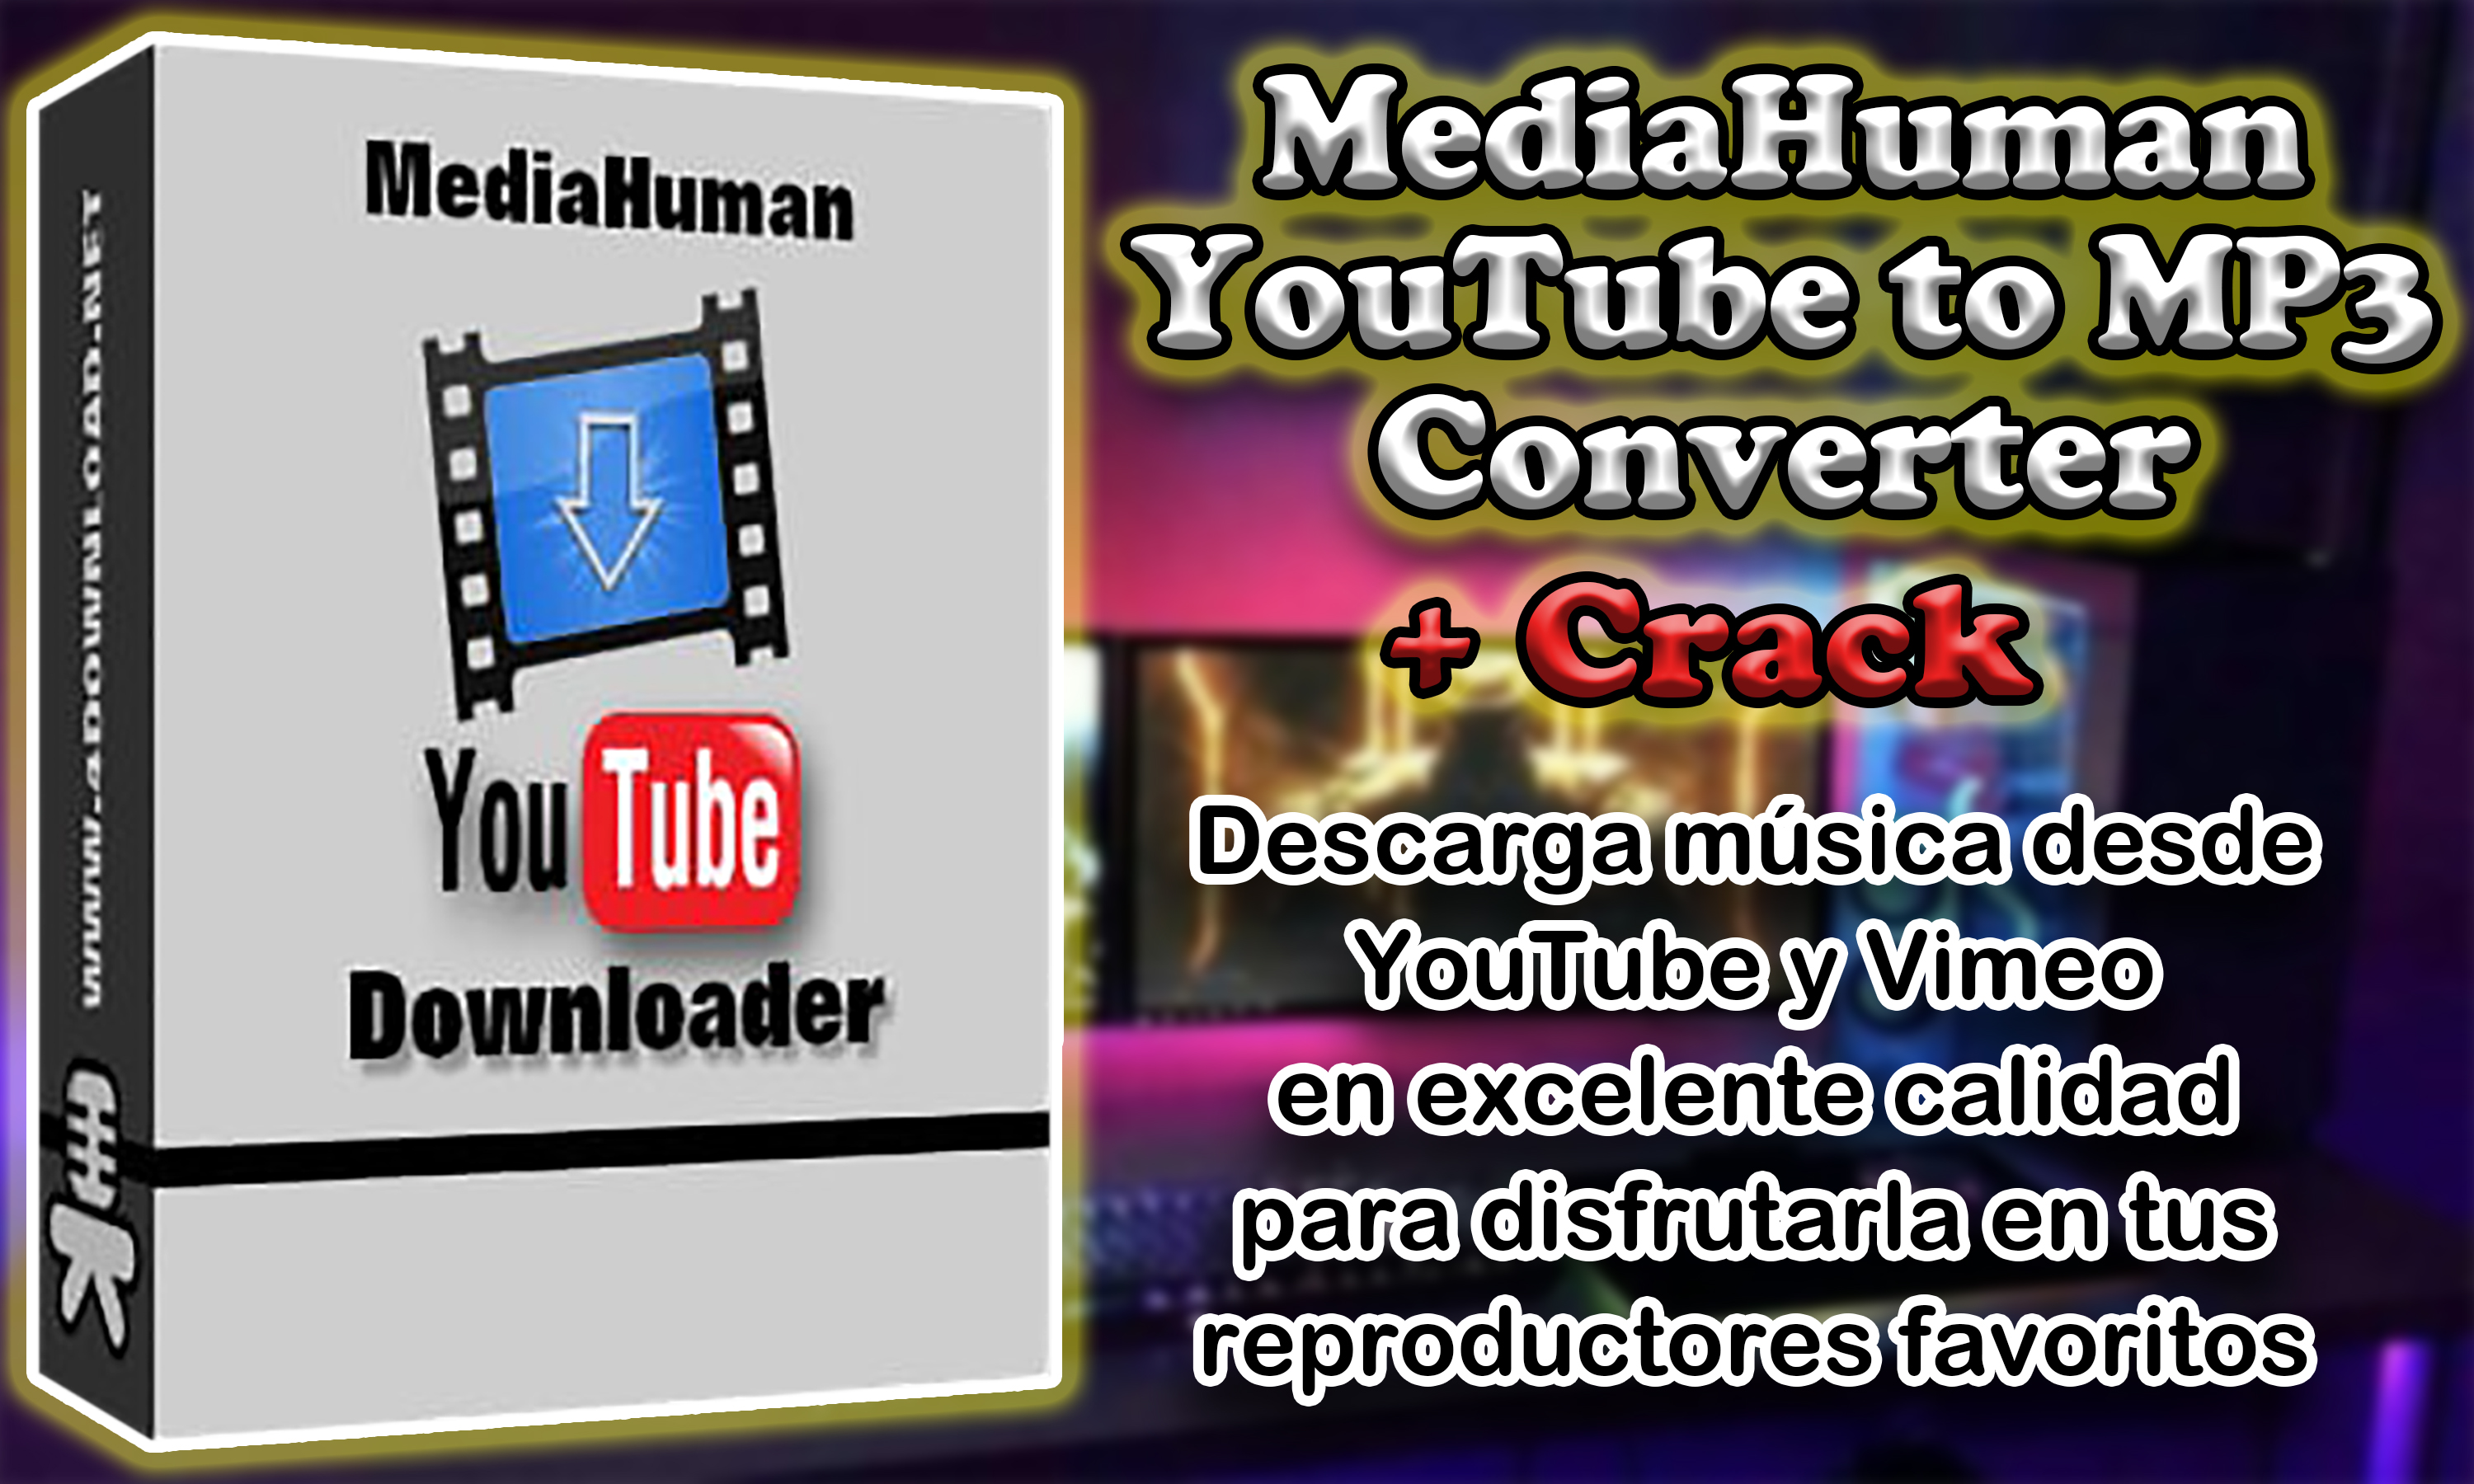 youtube to mp3 converter free download mediahuman